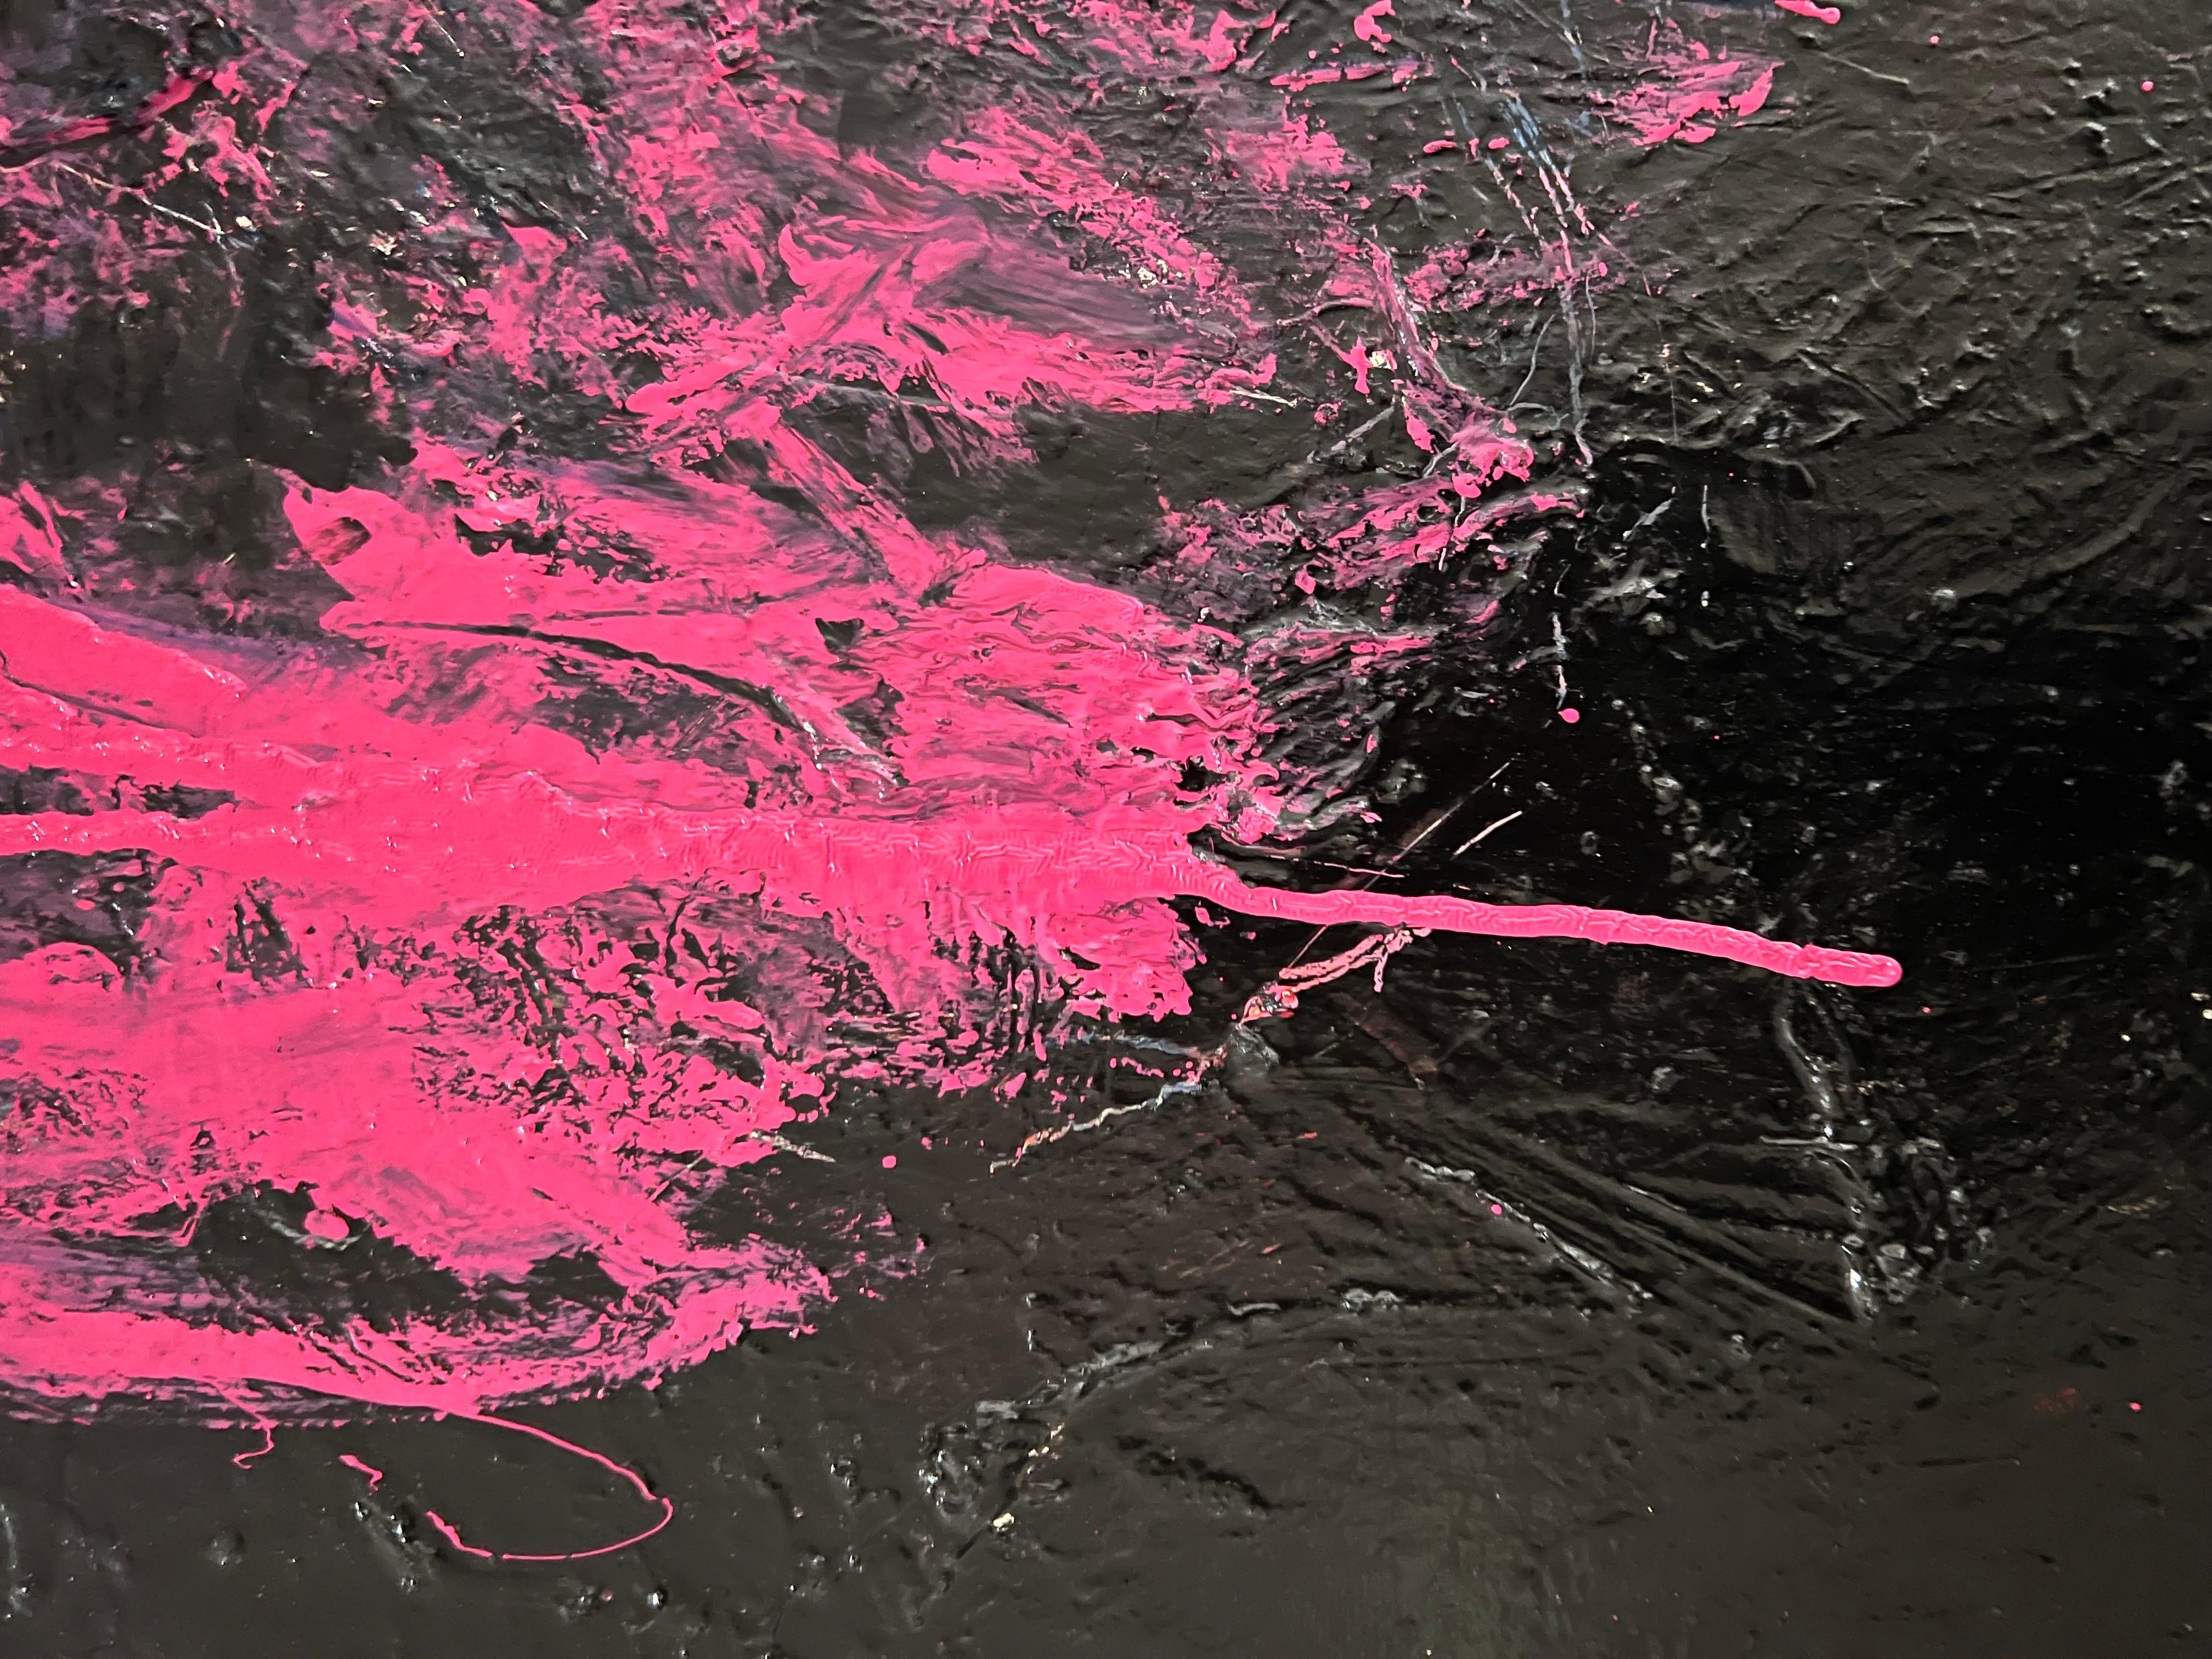 A large dramatic pink on black oil painting by listed artist Norman Liebman. Signed on back. Unframed.

Norman Liebman: Abstract Expressionist Painter, born in 1931 was a remarkable individual whose life was a tapestry of two distinct passions: art